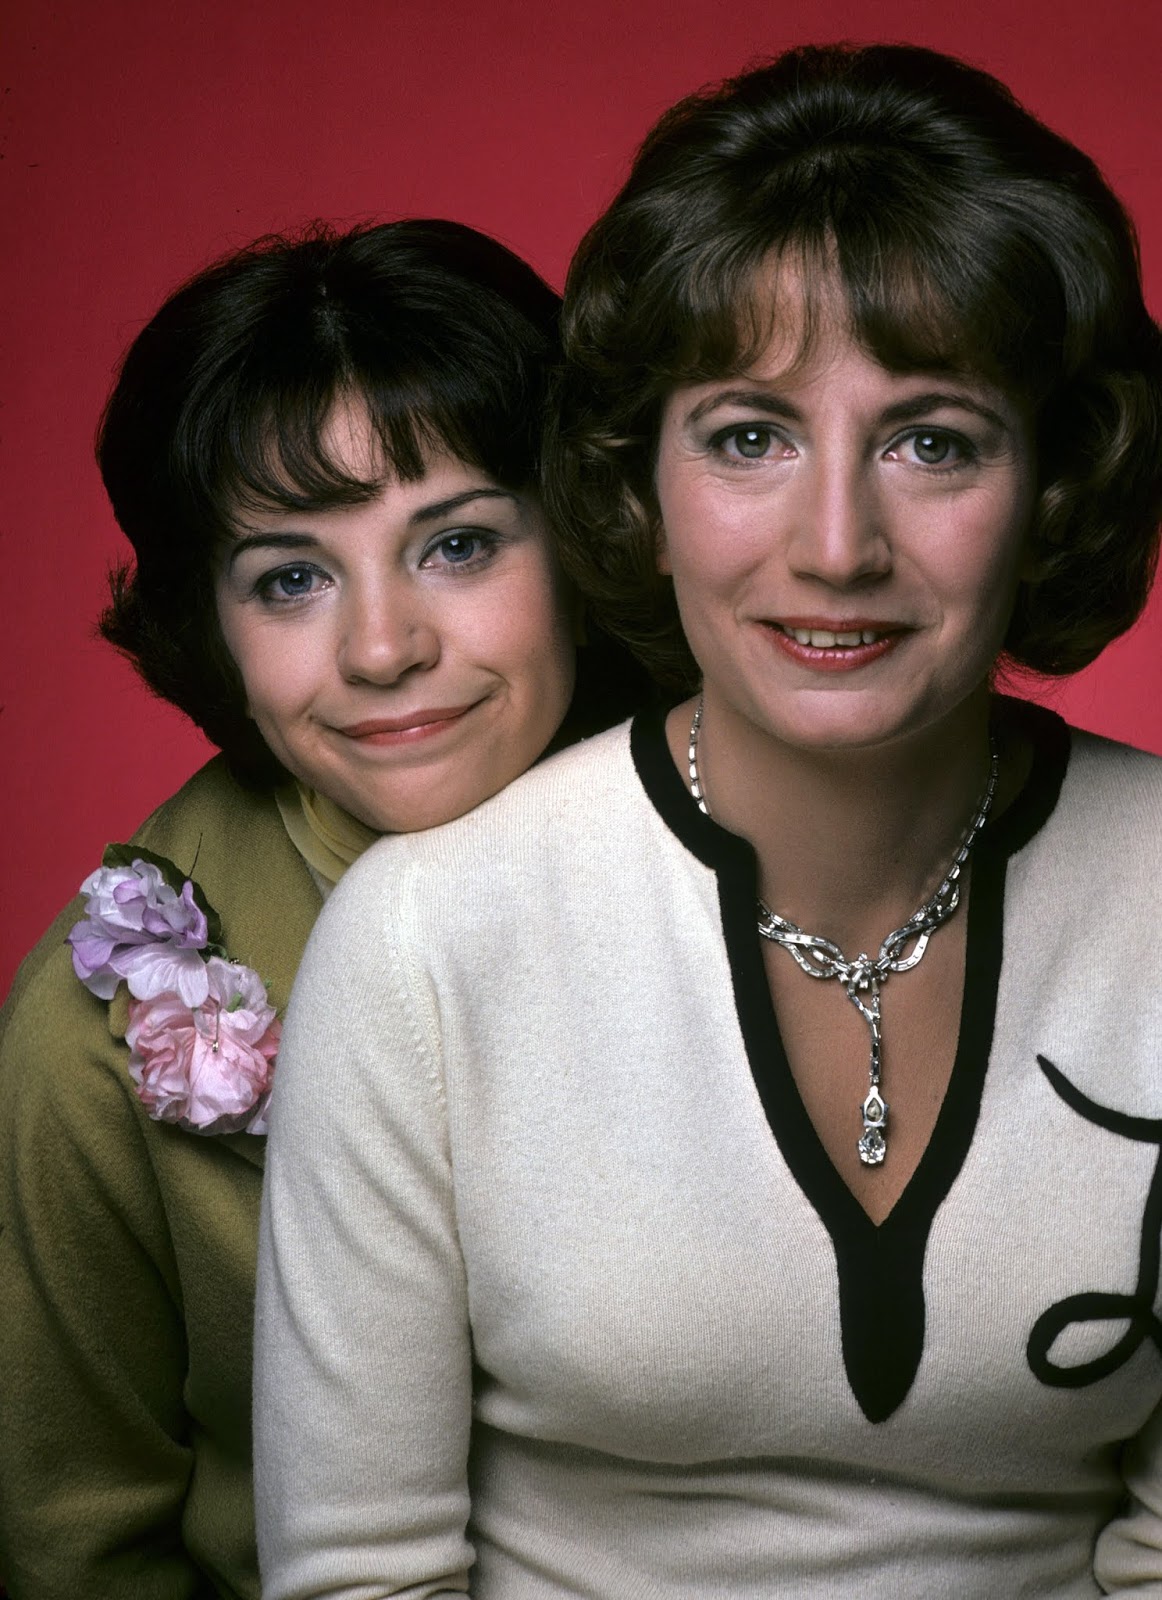 Penny Marshall, co-star of 'Laverne & Shirley' and director o...